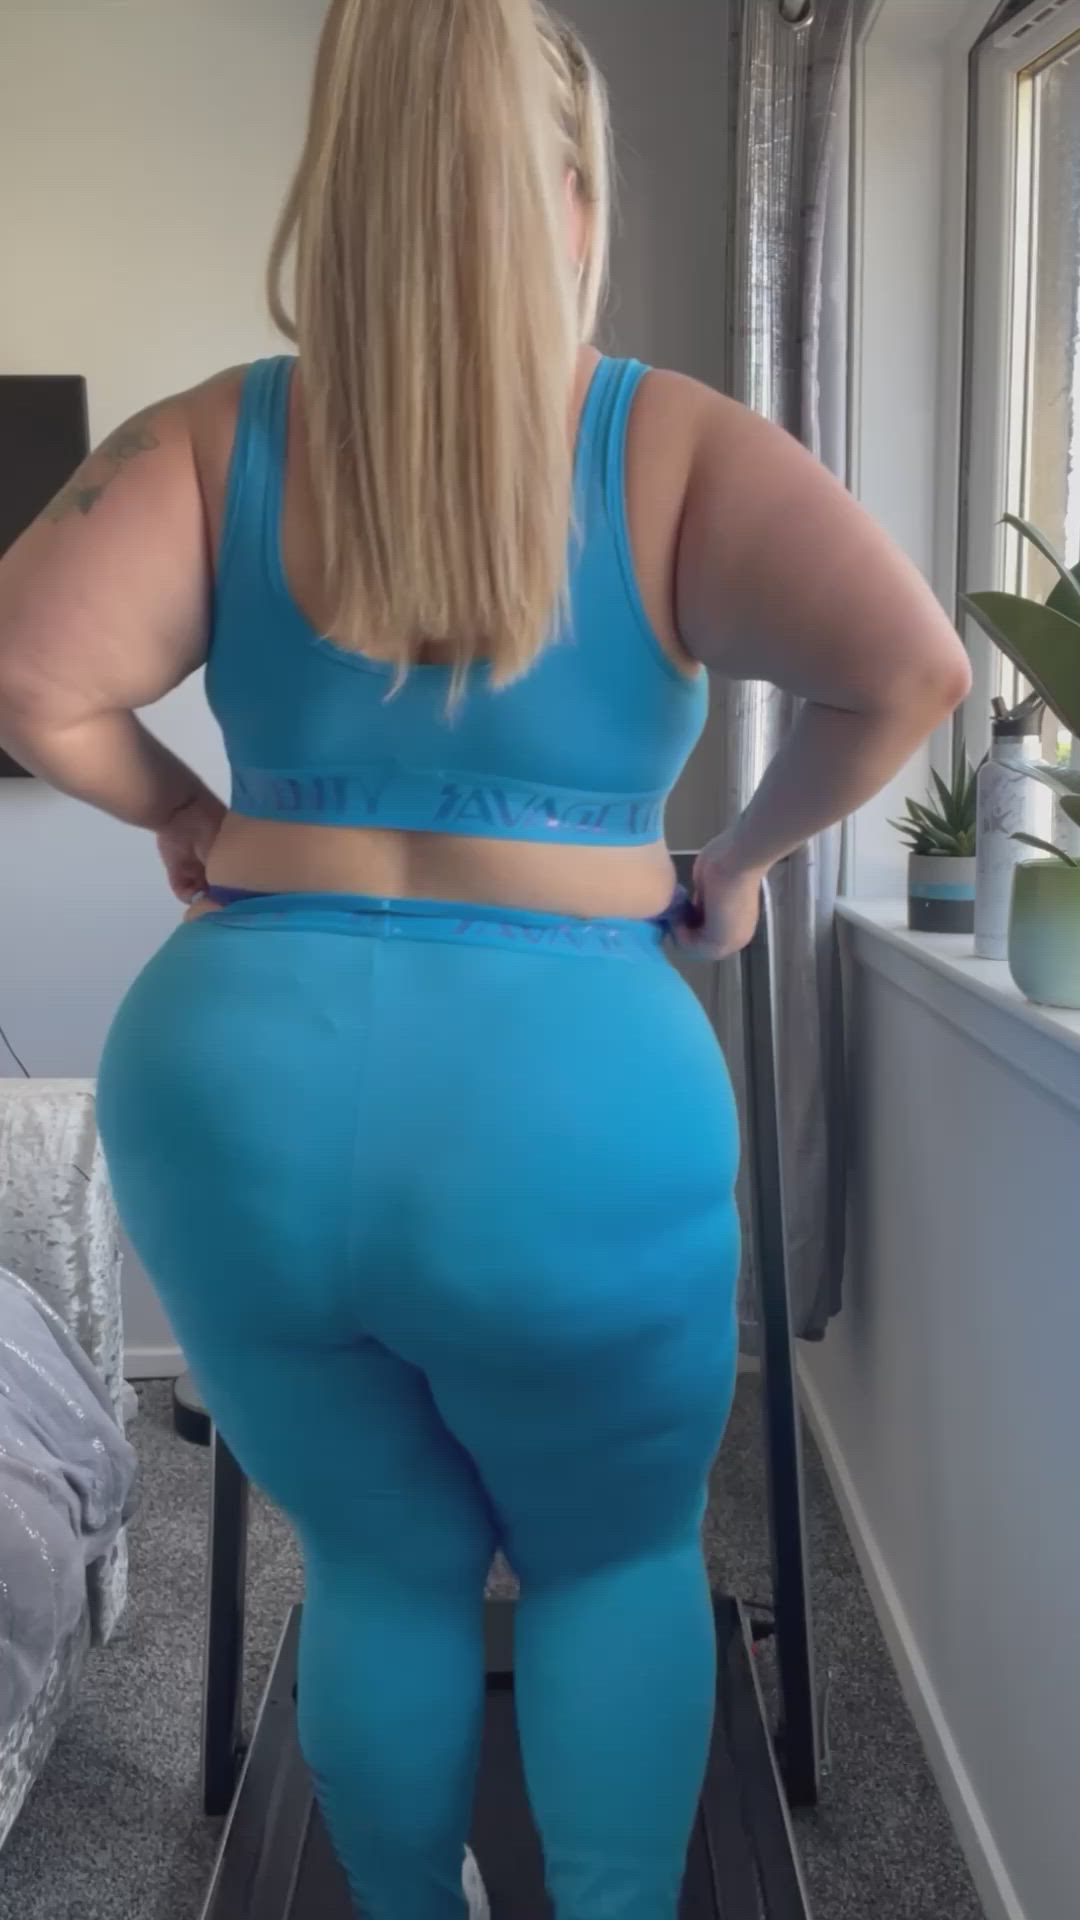 Big Tits porn video with onlyfans model Jodie lawson <strong>@jodielawsonx</strong>